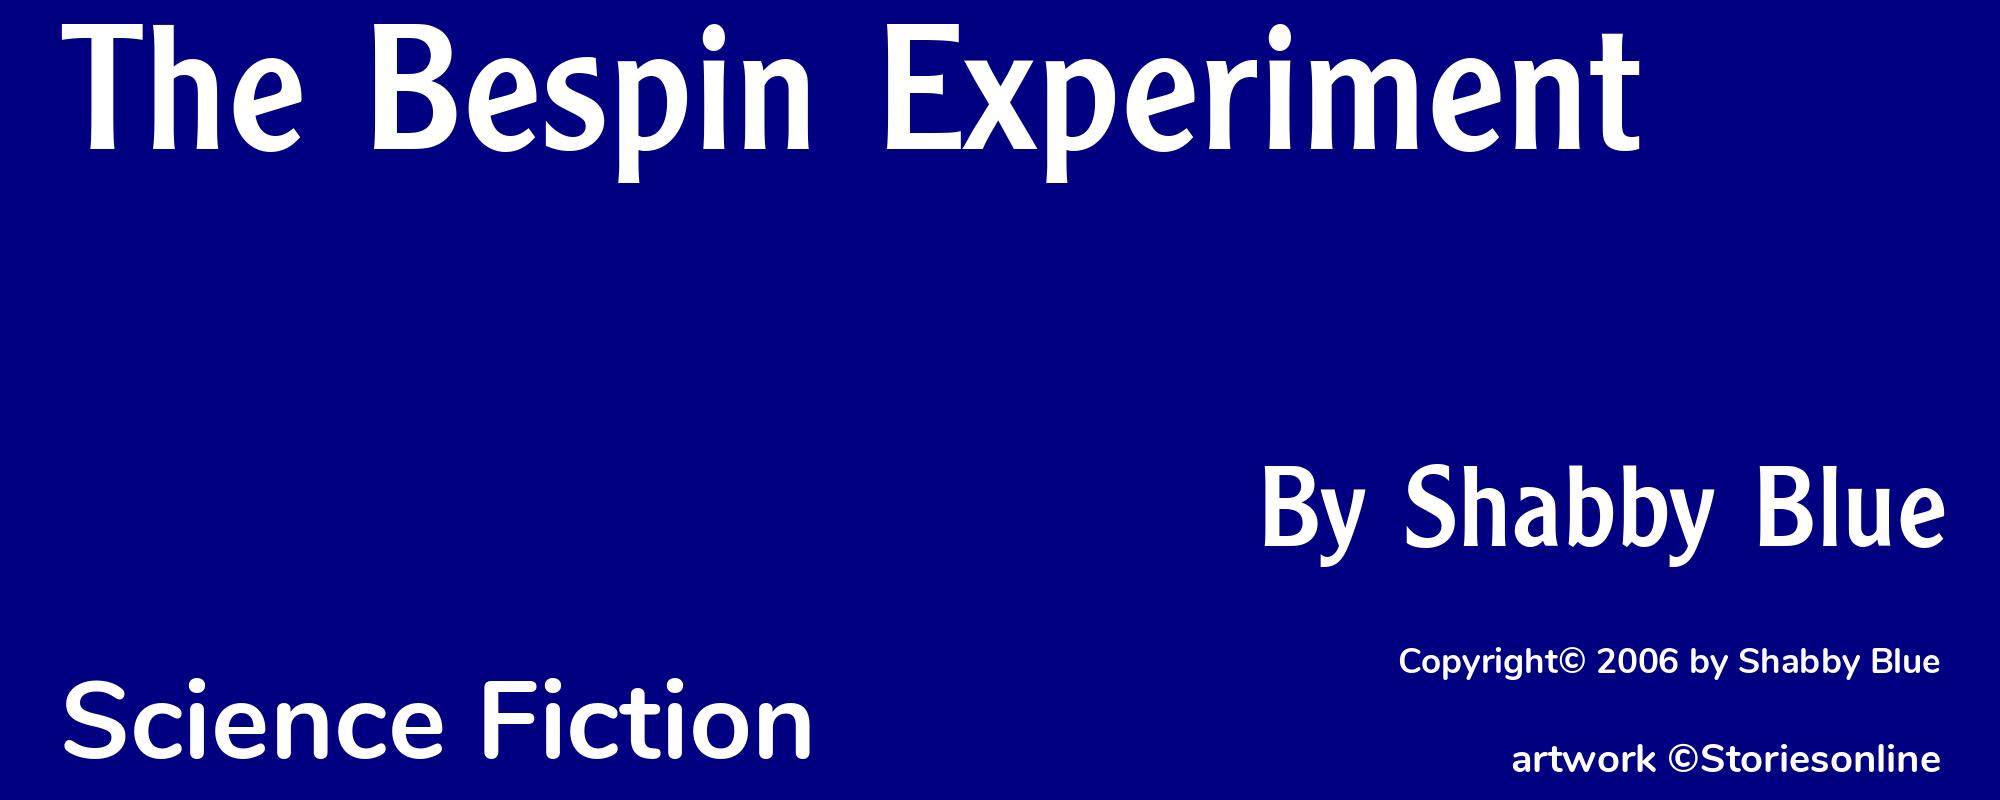 The Bespin Experiment - Cover